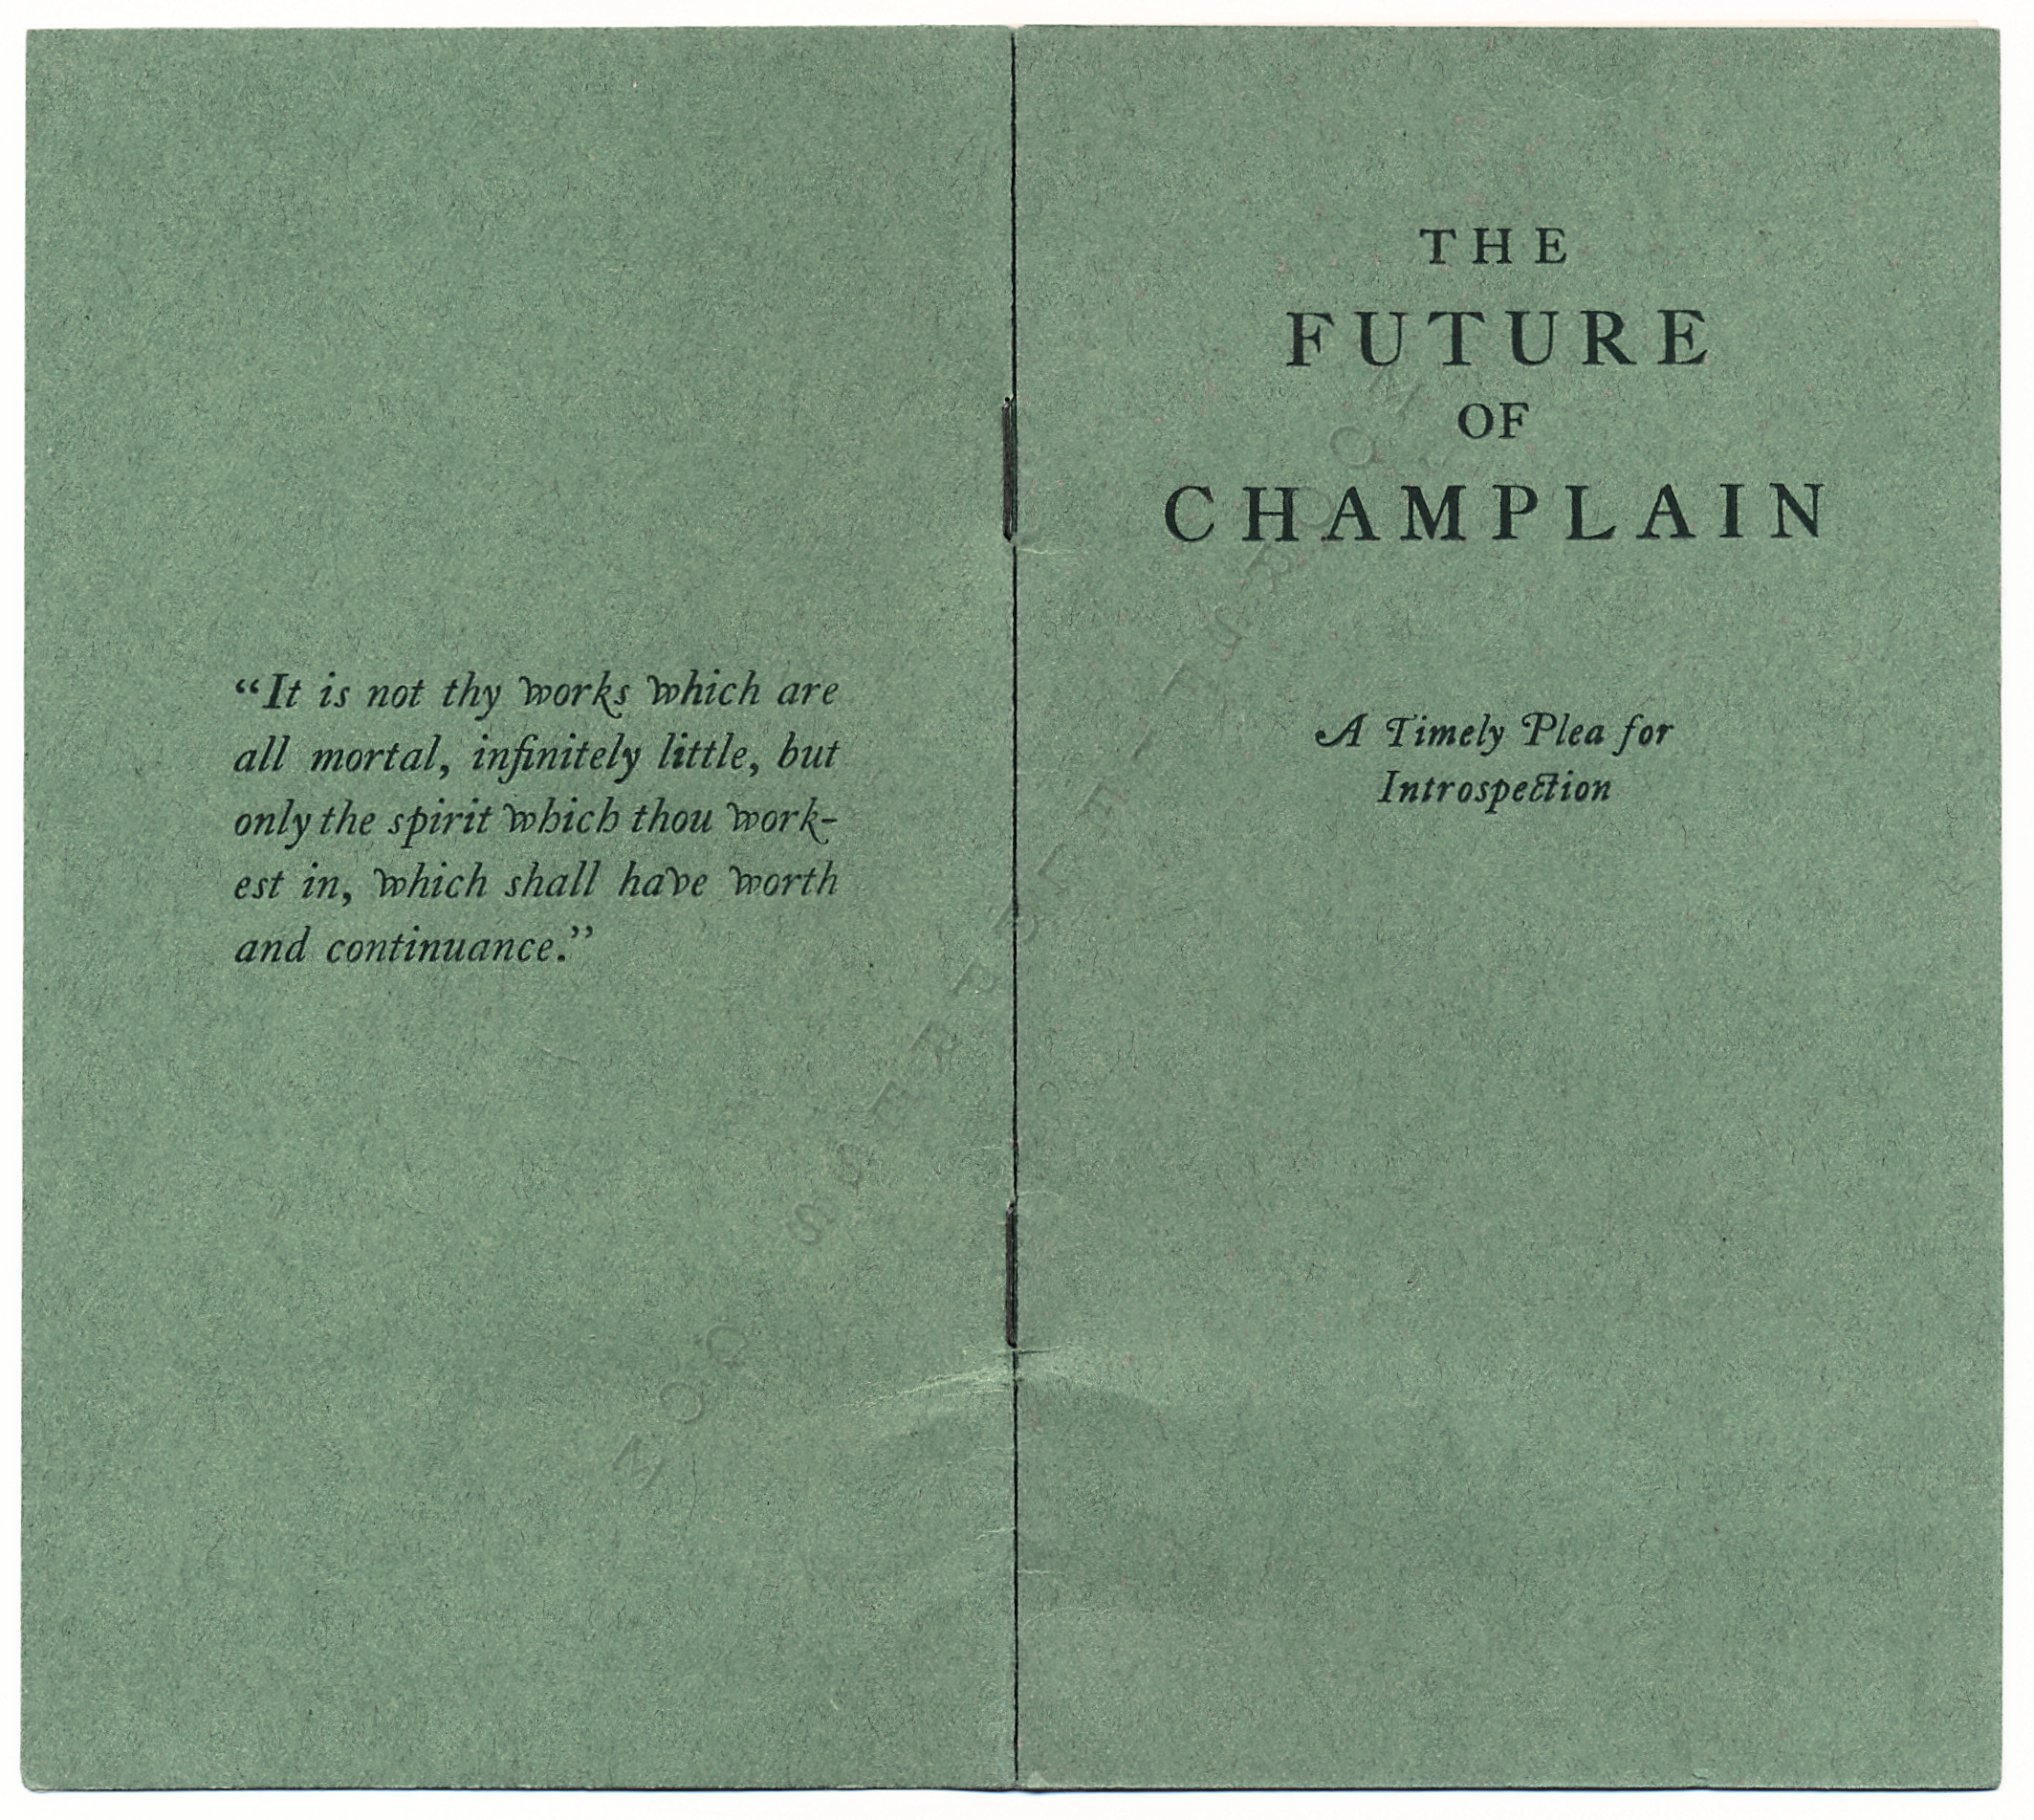 The
                    Future of Champlain by H.M. Mott